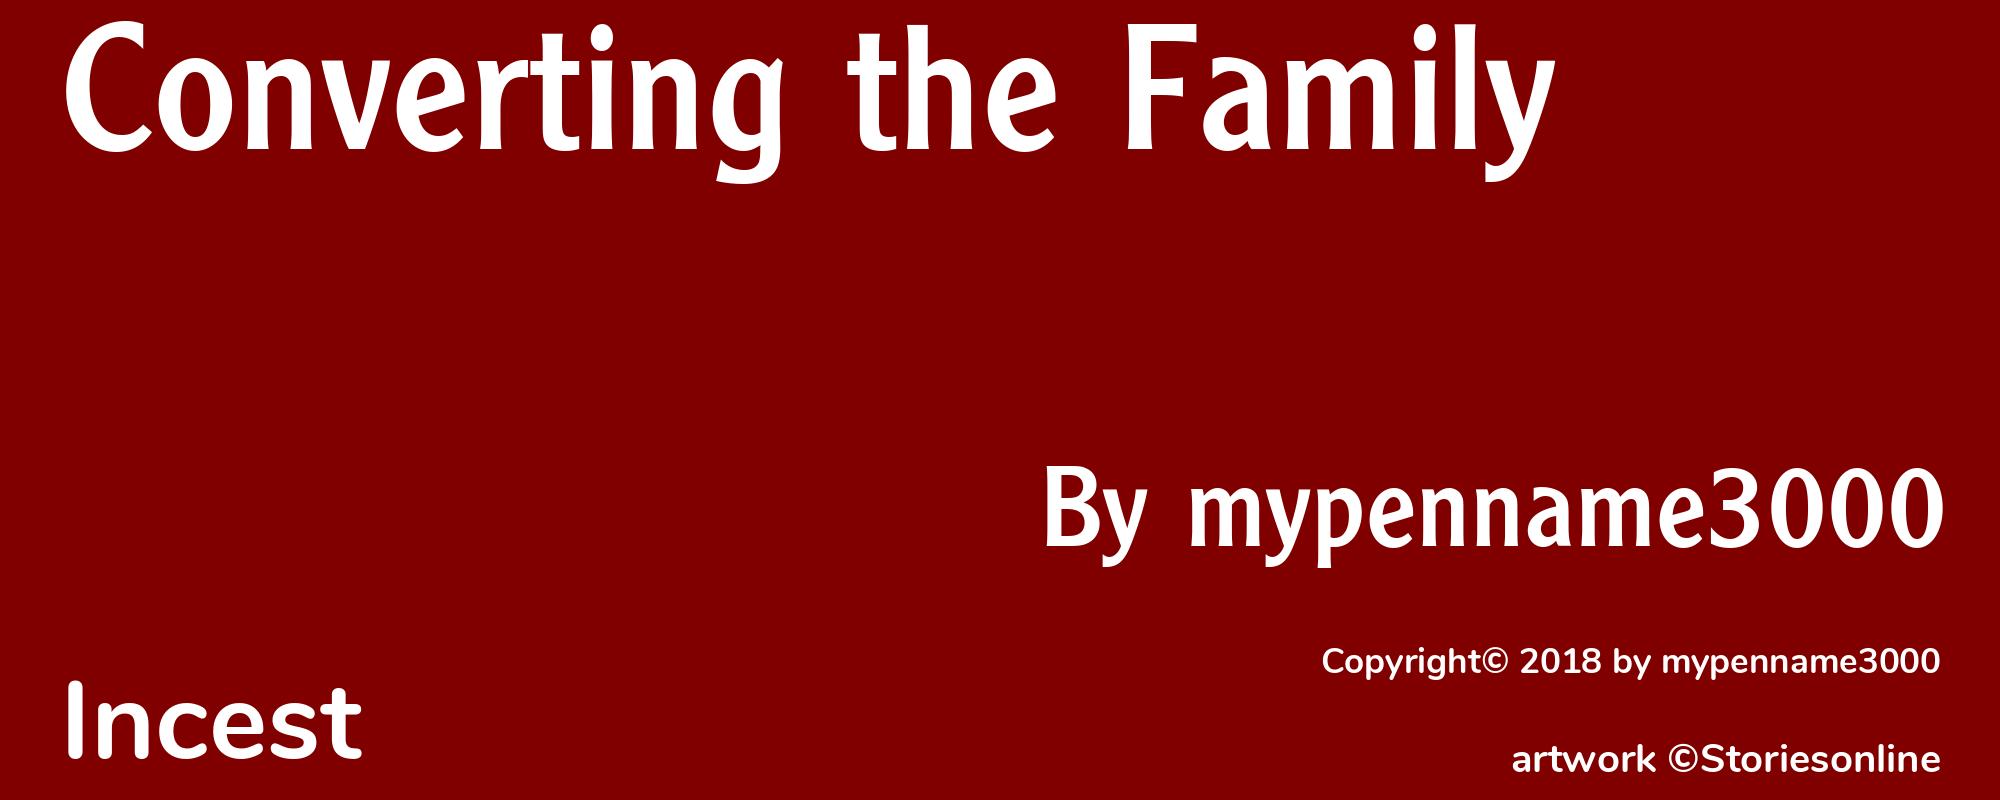 Converting the Family - Cover